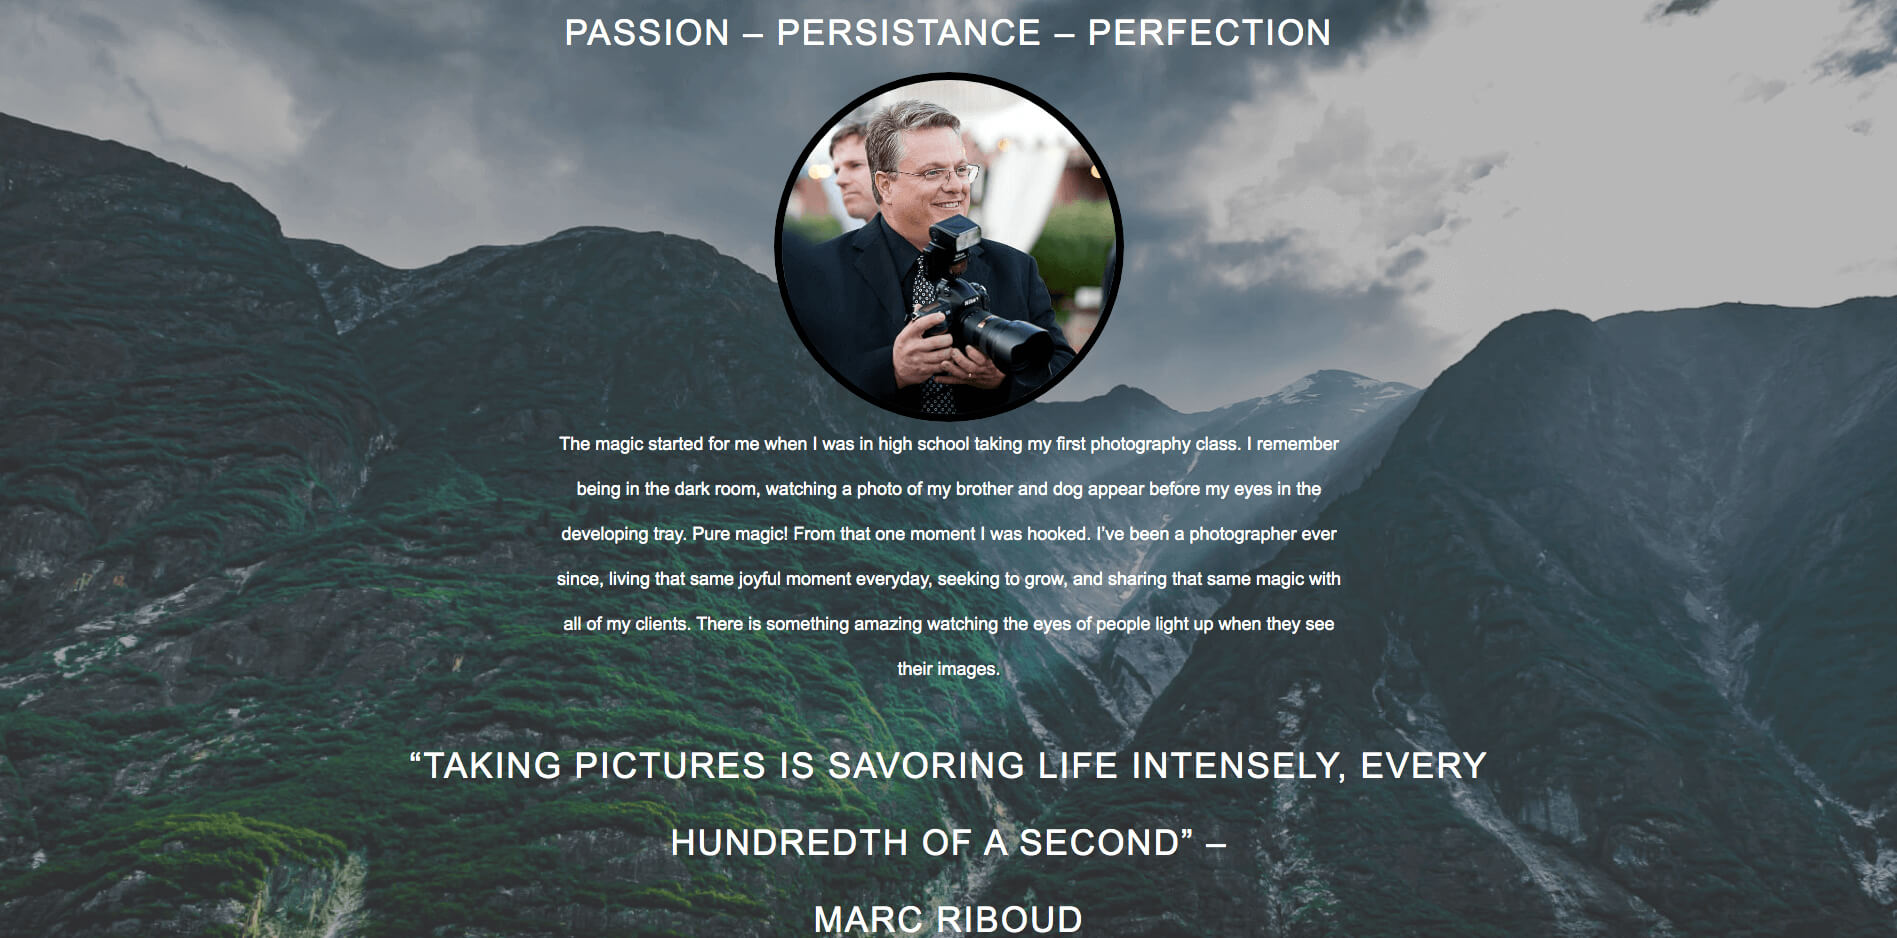 coleman photography website design for local photographer